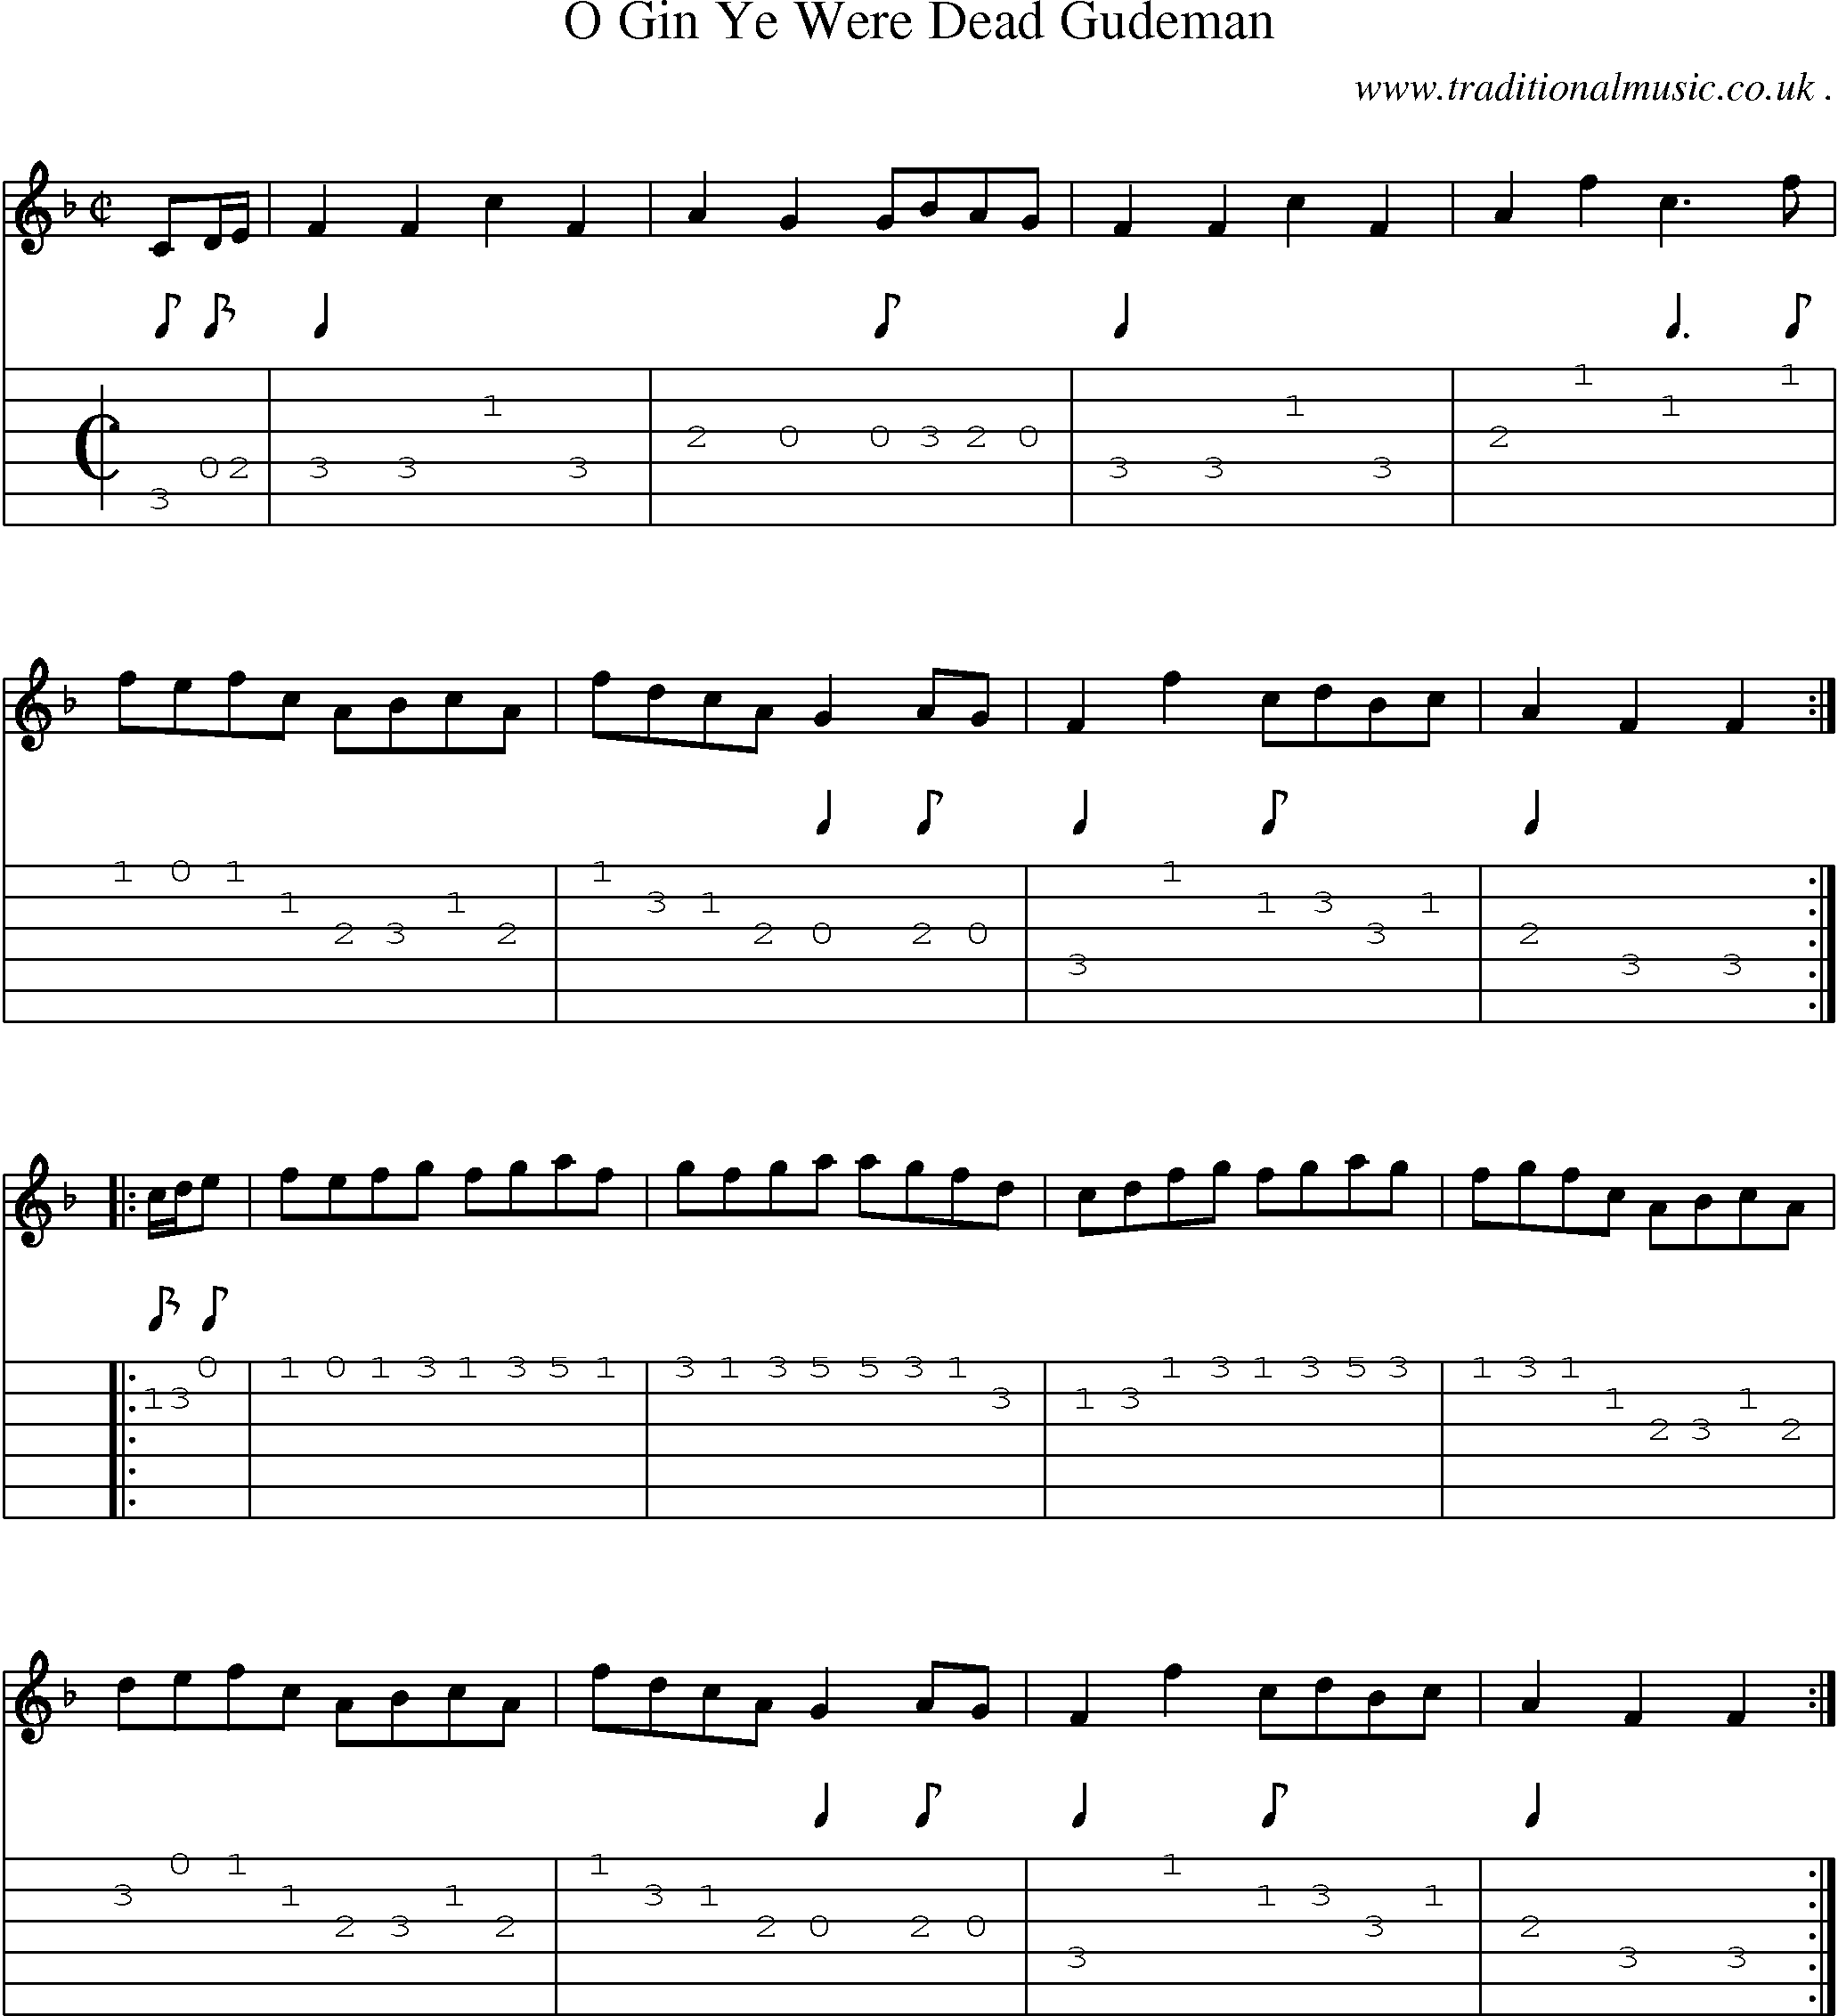 Sheet-music  score, Chords and Guitar Tabs for O Gin Ye Were Dead Gudeman